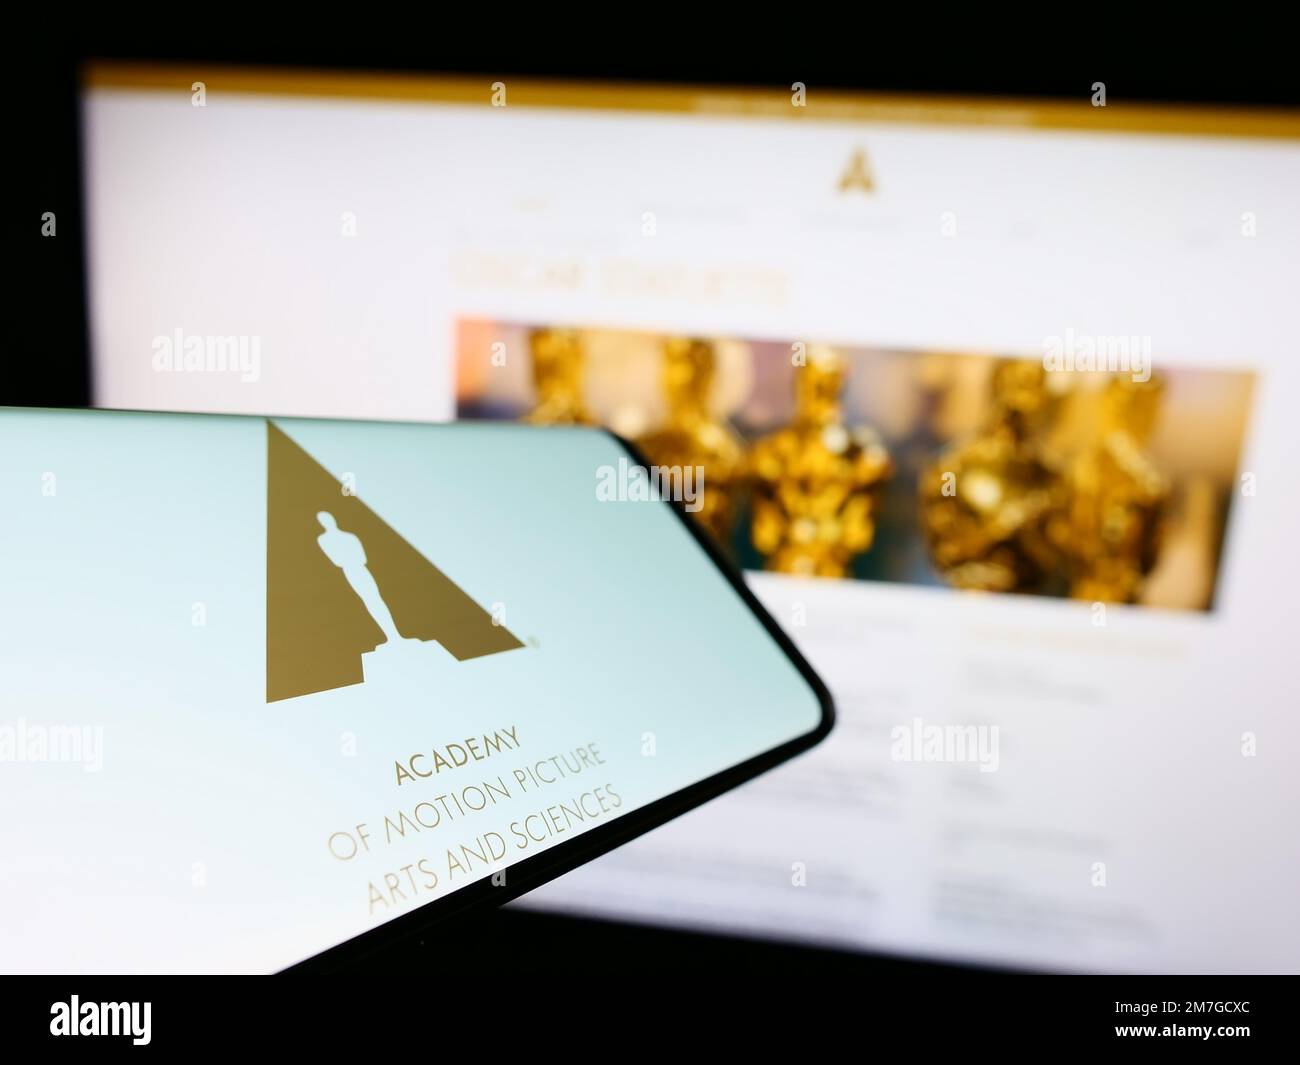 Mobile phone with logo of Academy of Motion Picture Arts and Sciences (AMPAS) on screen in front of website. Focus on center-left of phone display. Stock Photo